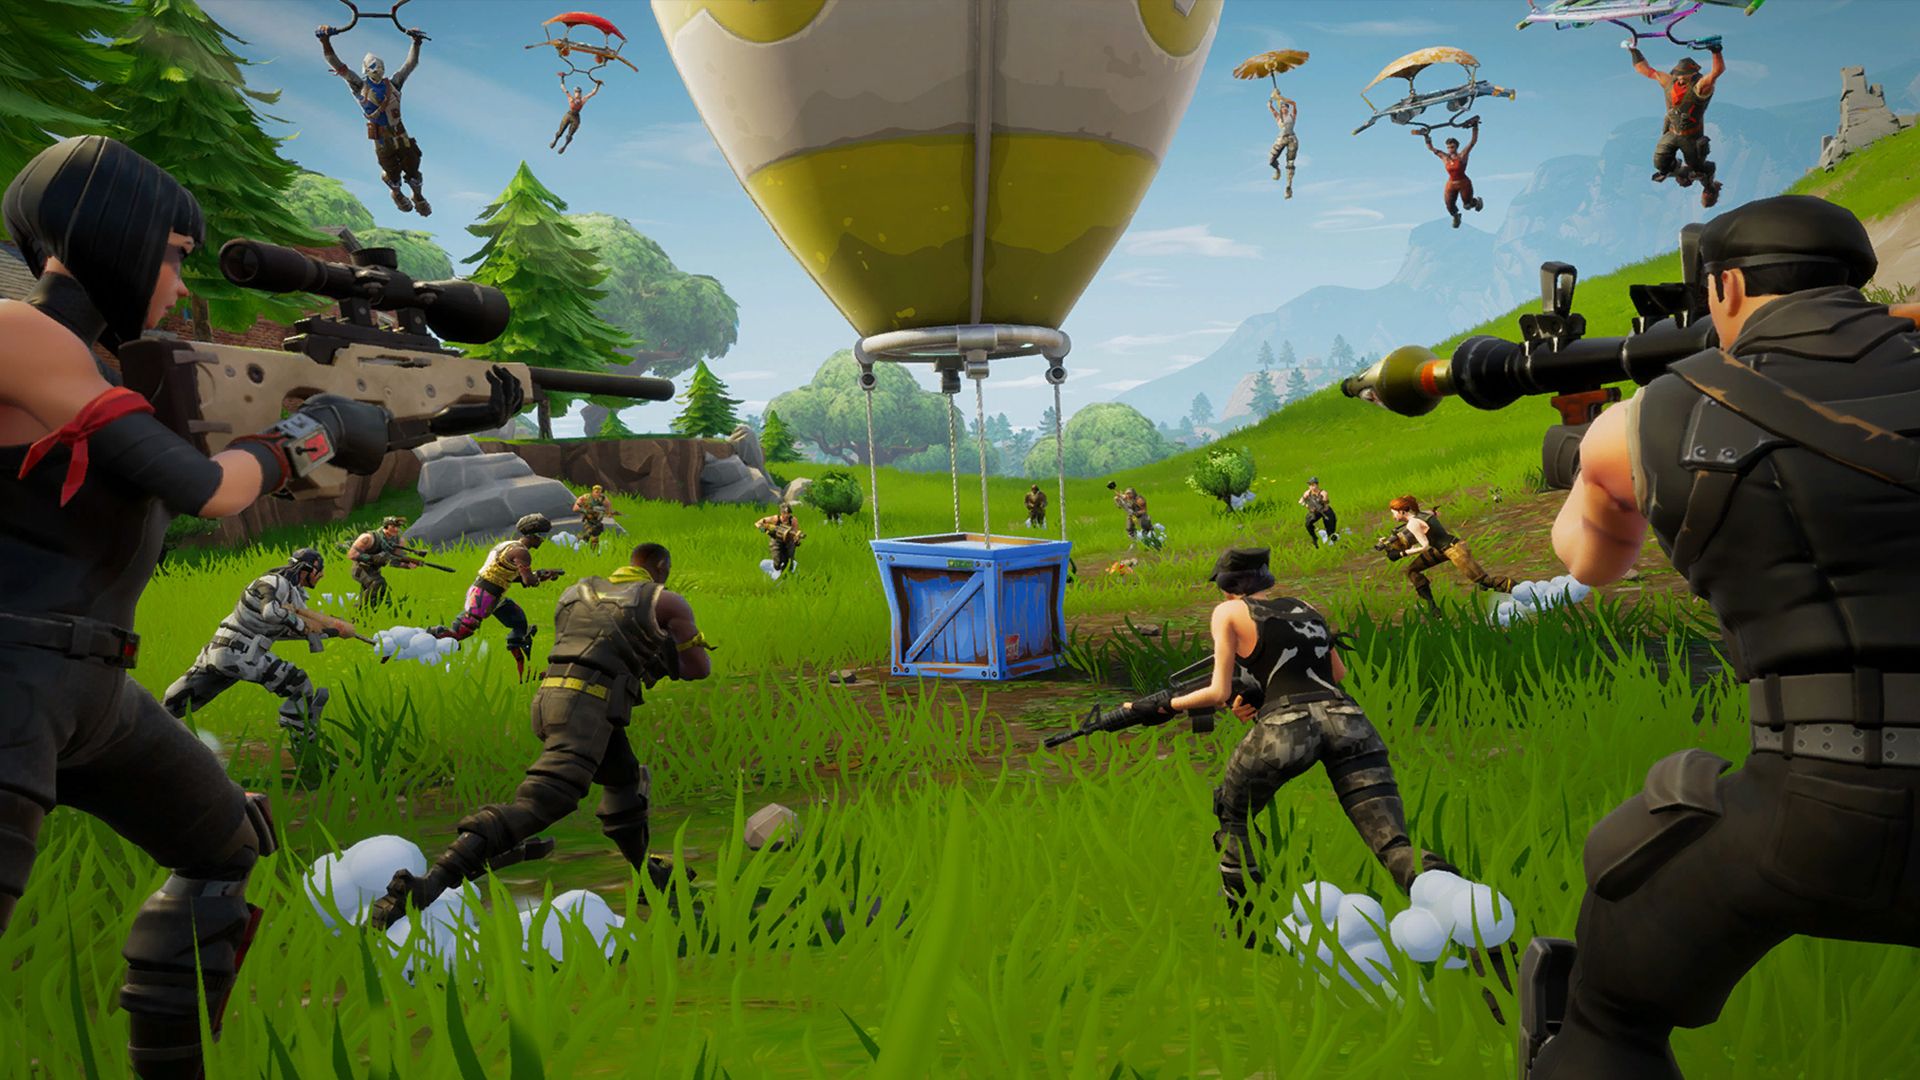 Fortnite Reports Record-Breaking Numbers Despite Launch of Apex Legends